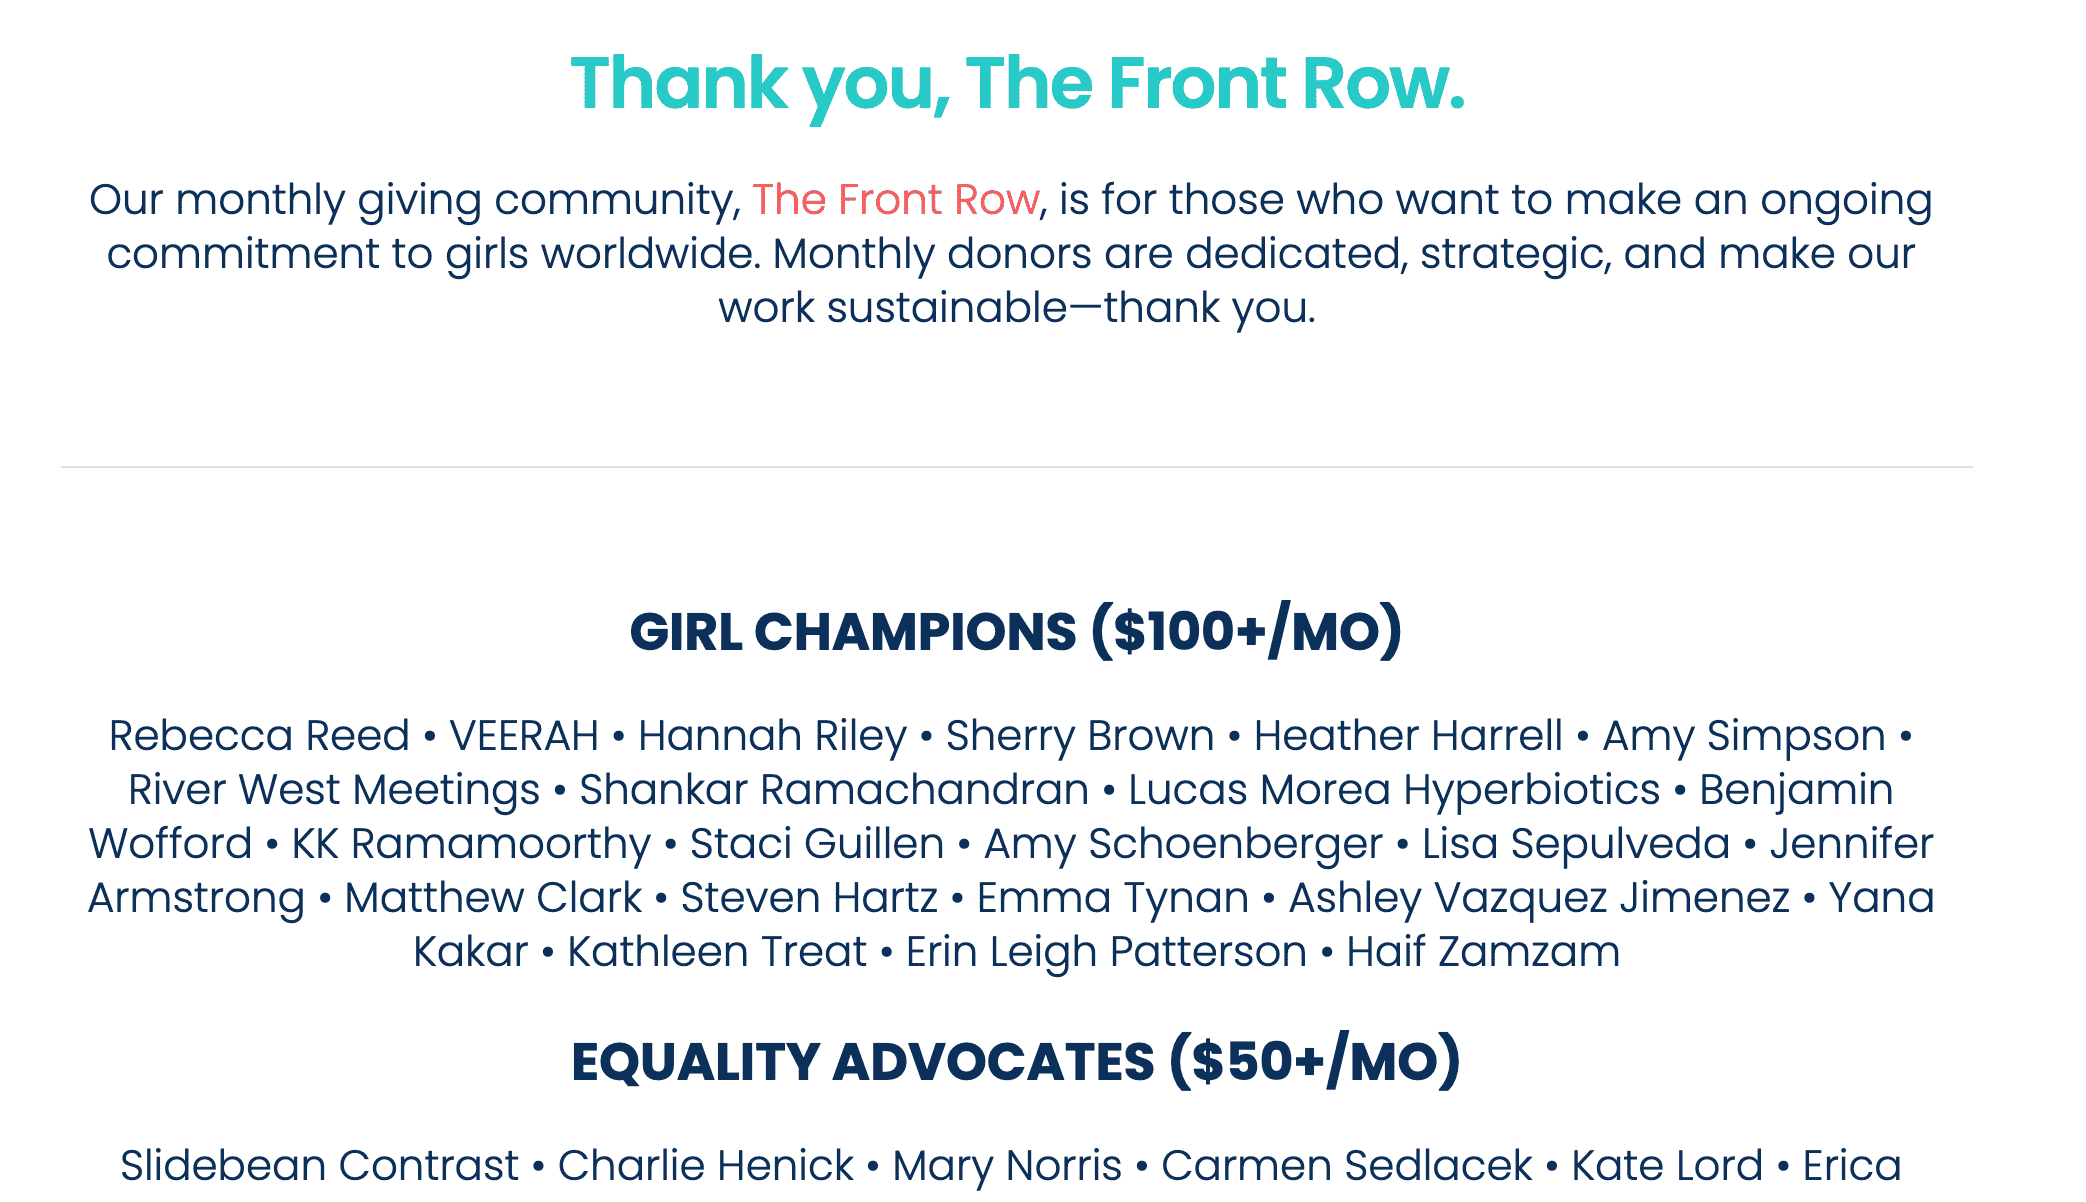 Screenshot showing donor level names for The Front Row monthly giving program